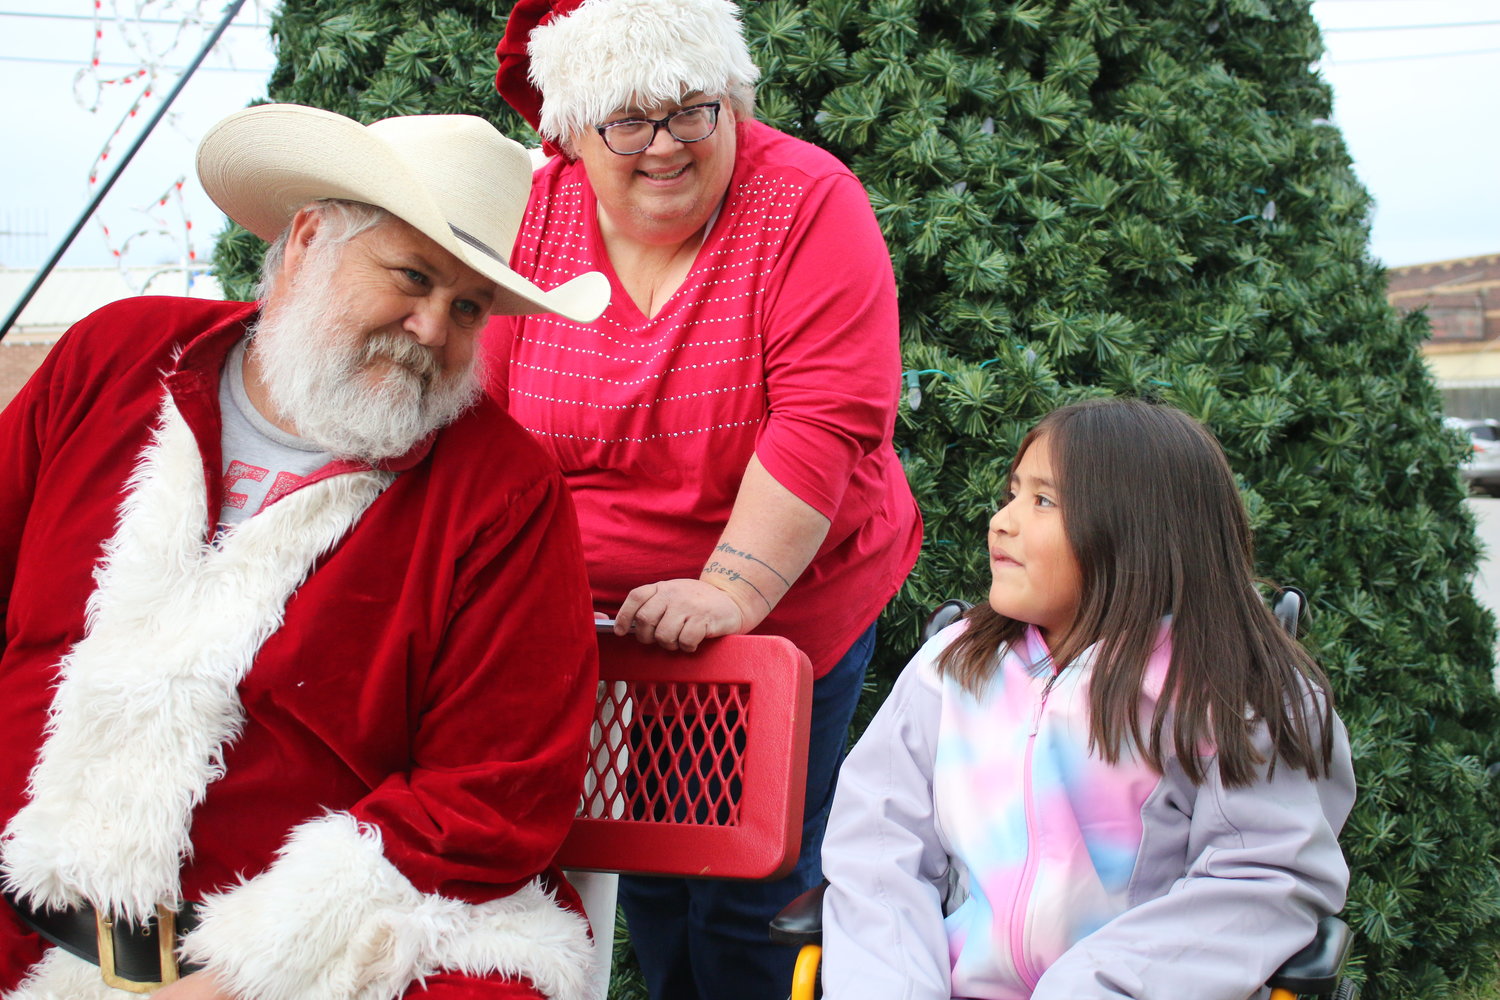 Santa Claus talks to Suraya Torres, 6, of Nixon, about what she wants for Christmas as Mrs. Claus listens during the Nixon Tree Lighting ceremony on Friday, Nov. 26.